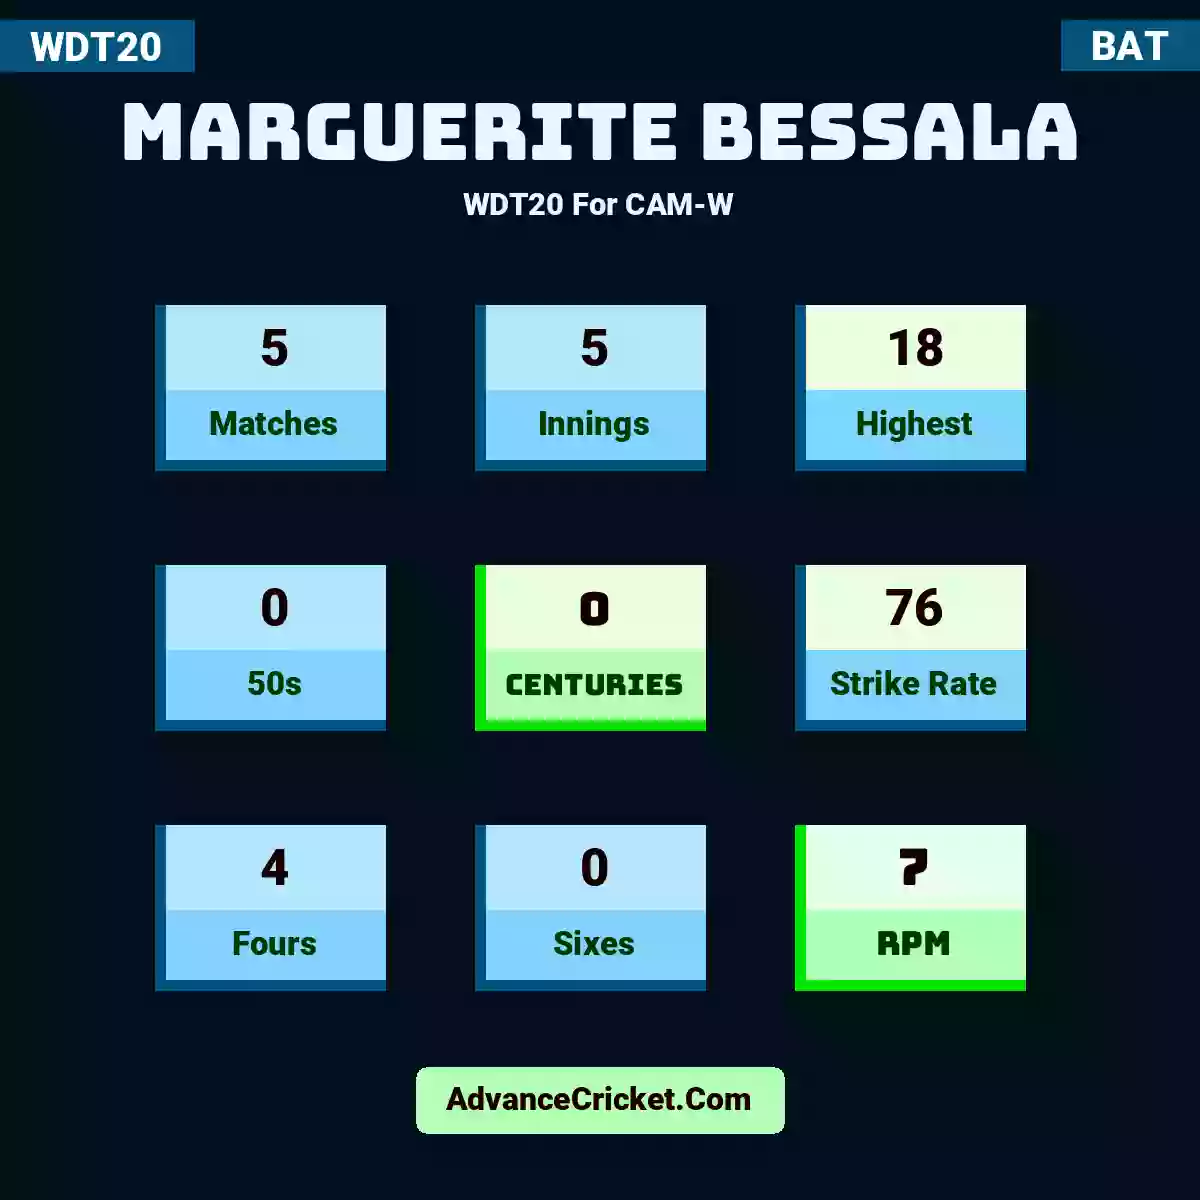 Marguerite Bessala WDT20  For CAM-W, Marguerite Bessala played 5 matches, scored 18 runs as highest, 0 half-centuries, and 0 centuries, with a strike rate of 76. M.Bessala hit 4 fours and 0 sixes, with an RPM of 7.